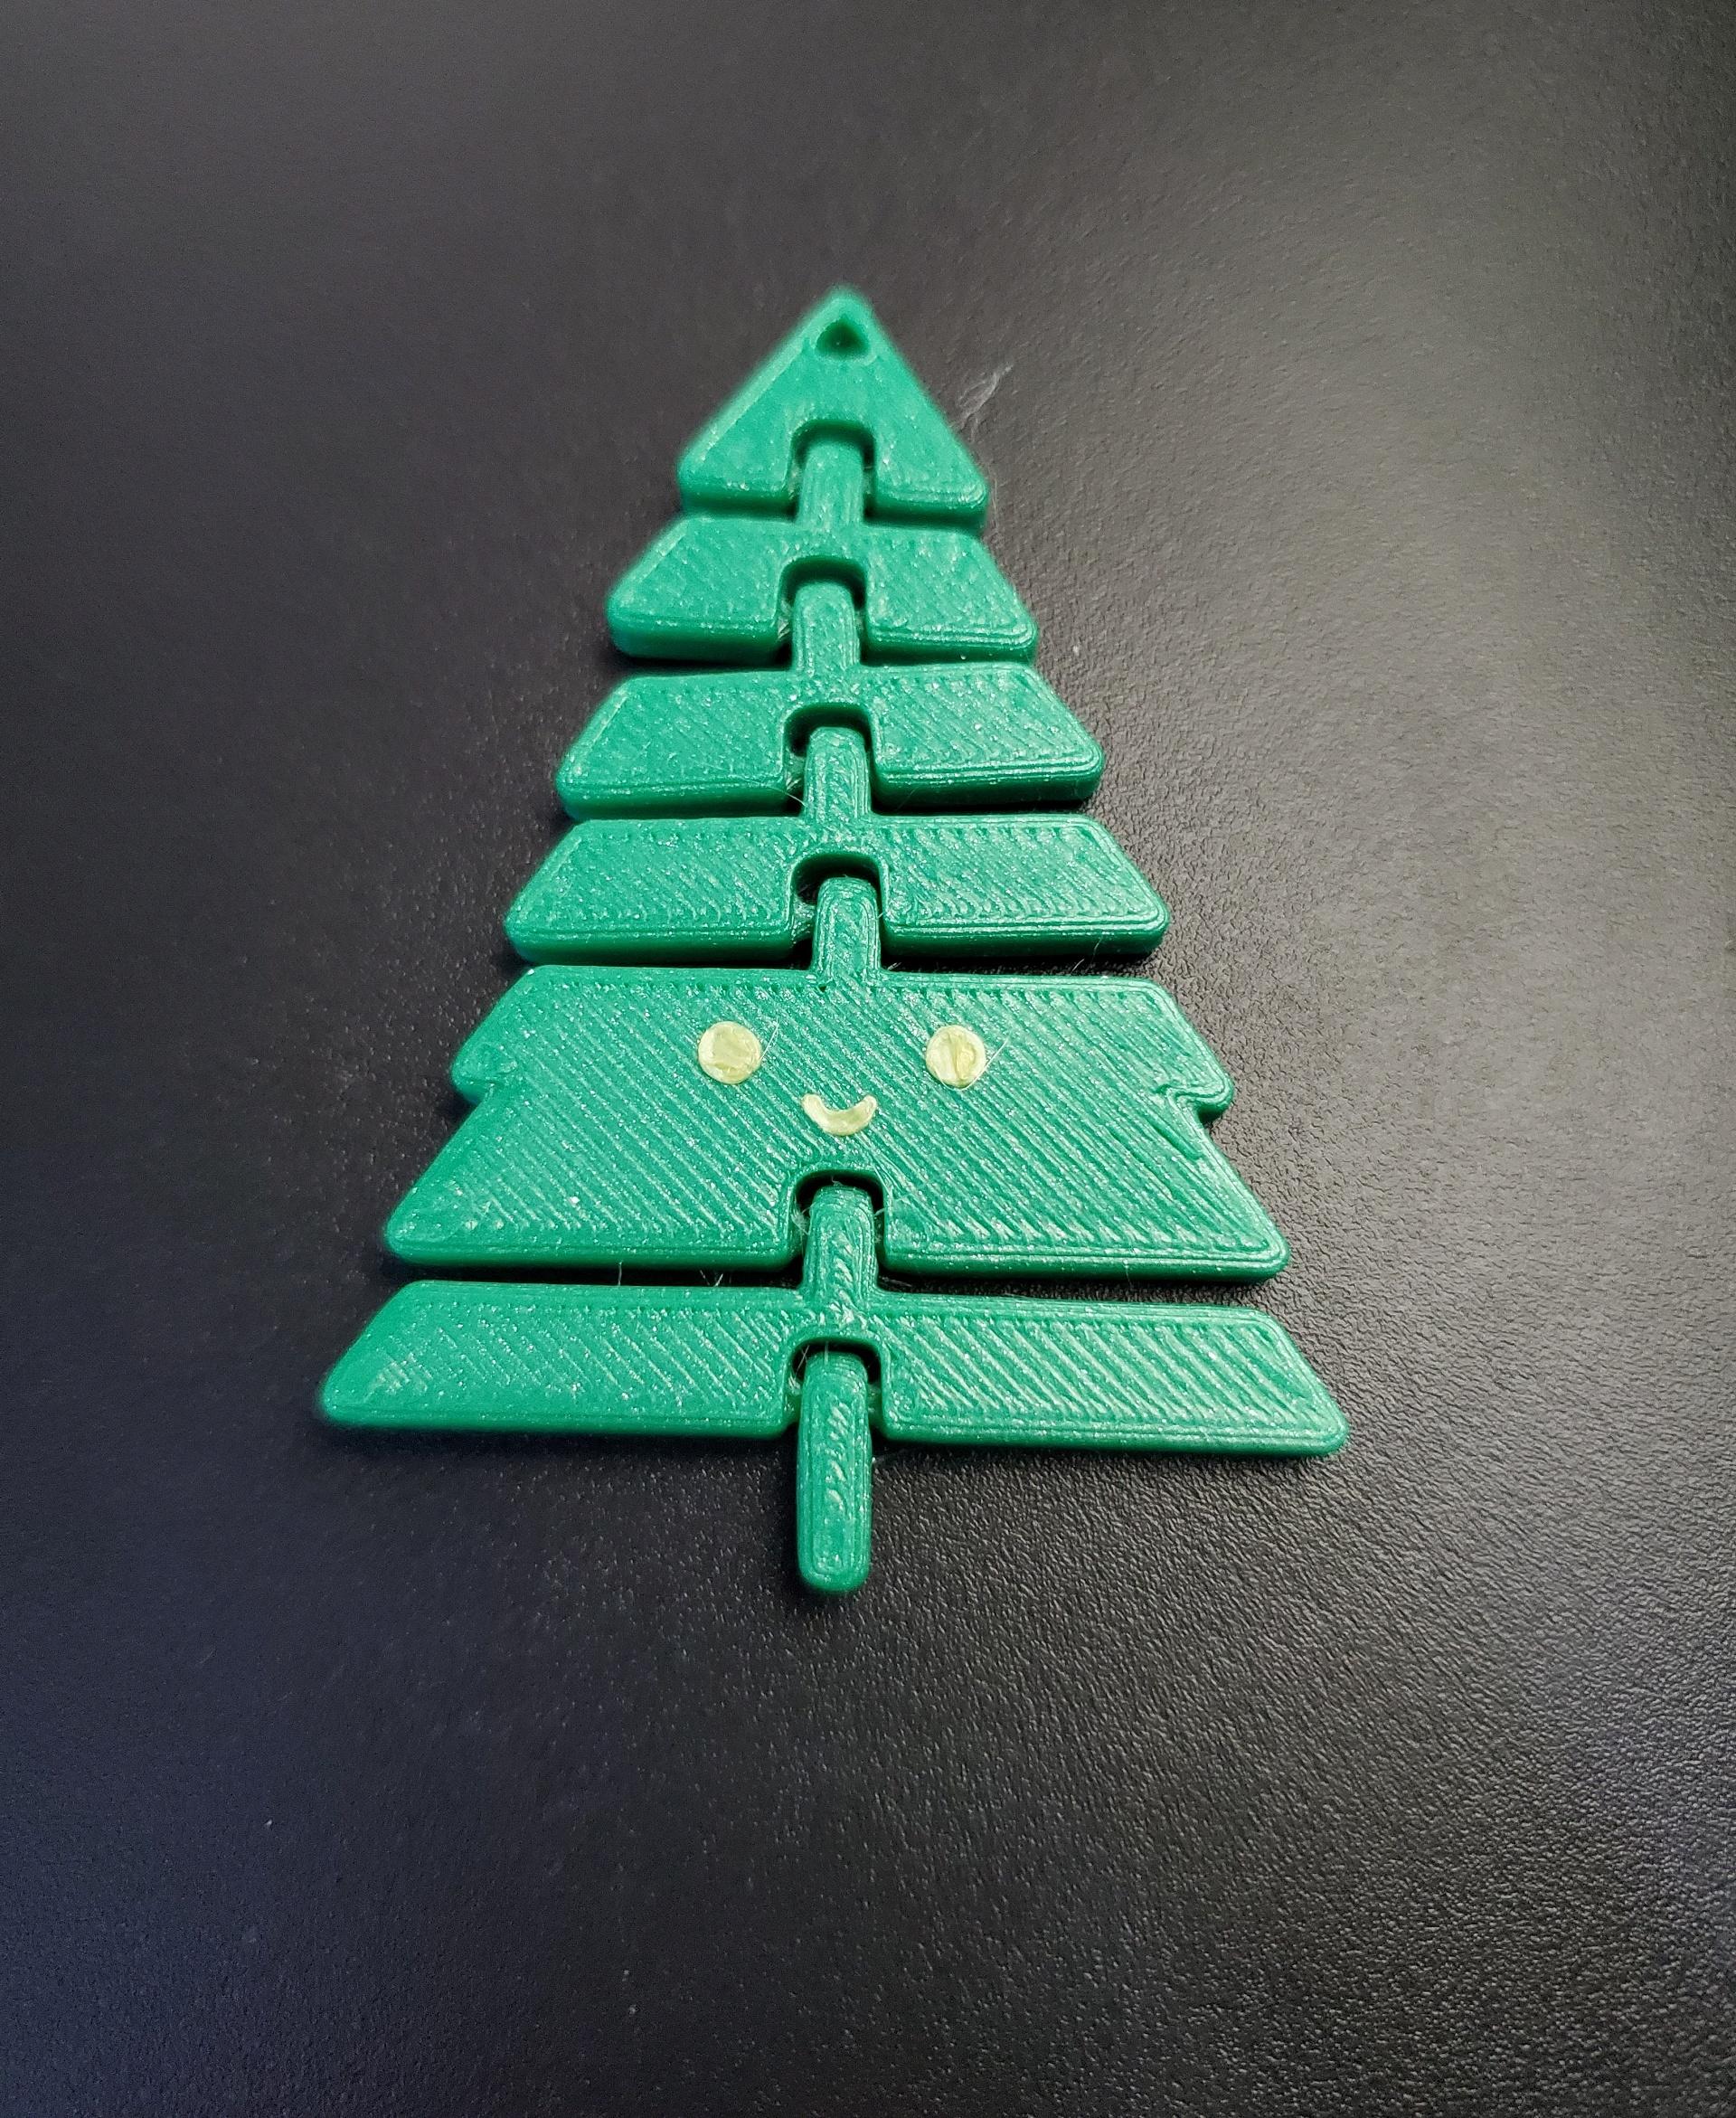 Articulated Kawaii Christmas Tree Keychain - Print in place fidget toy - 3mf - polymaker green pla - 3d model